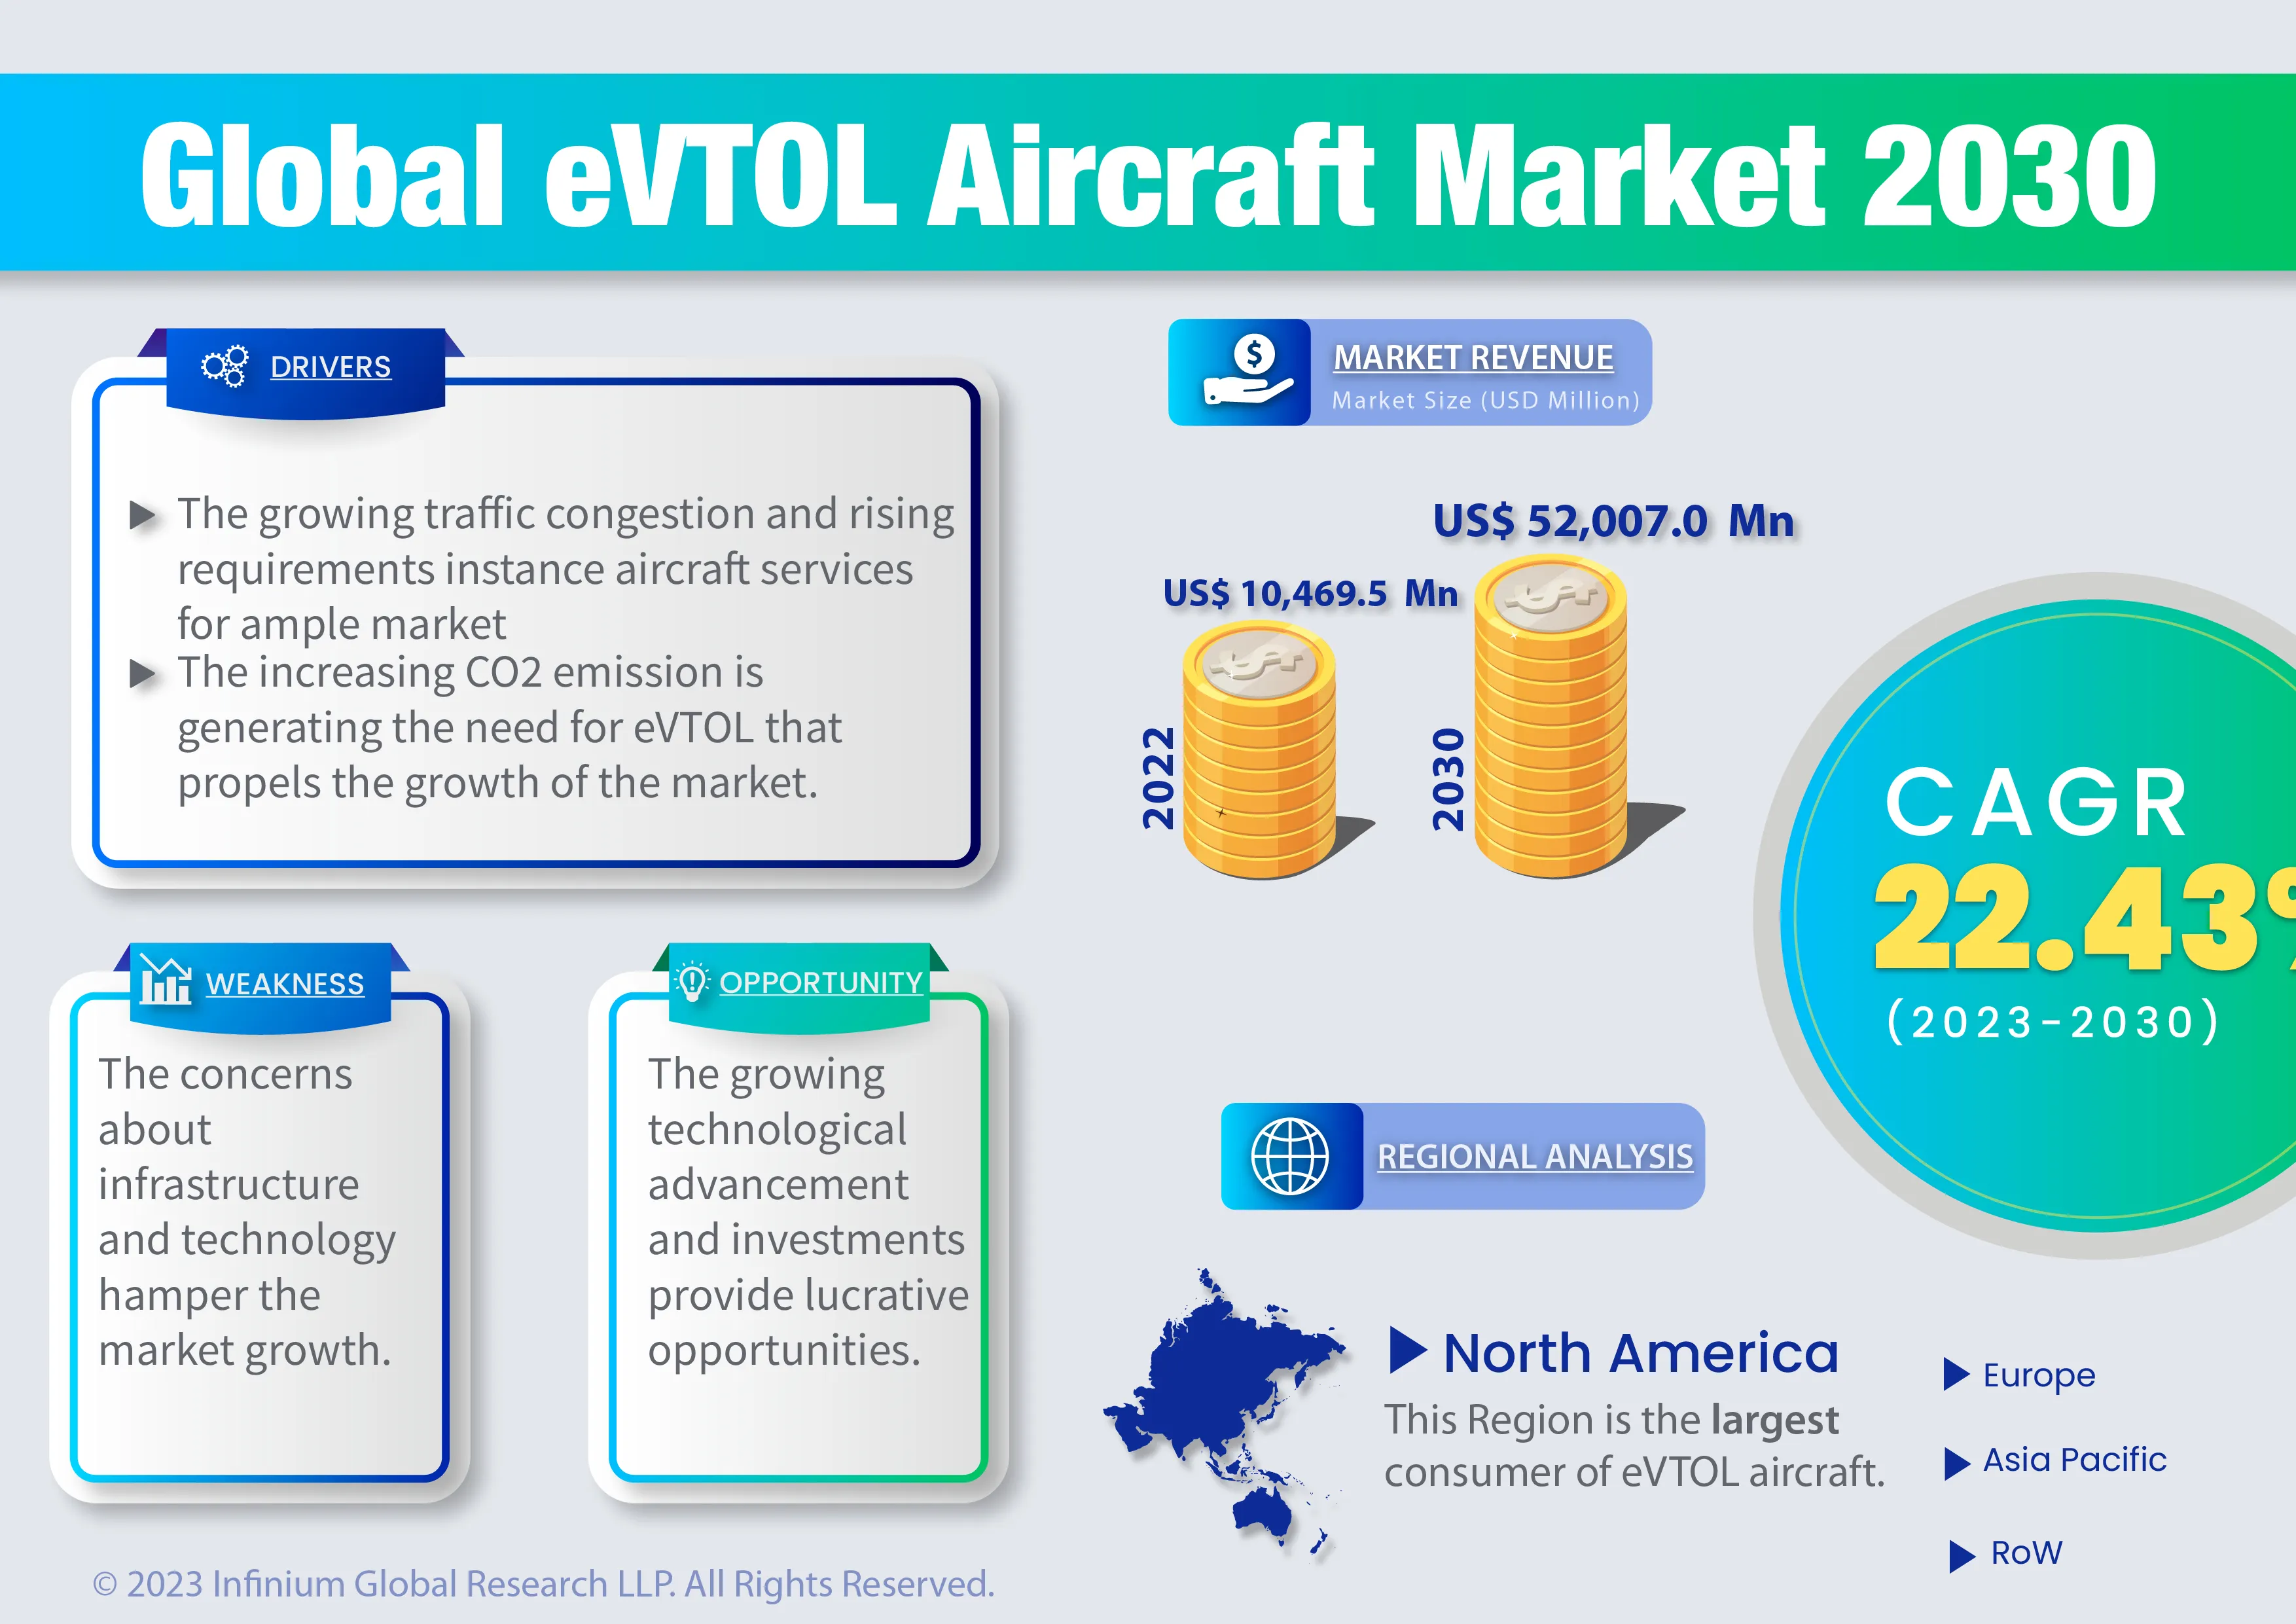 Global eVTOL Aircraft Market was Valued at USD 10,469.5 Million in 2022 and is Expected to Reach USD 52,007.0 Million in 2030, with a CAGR Of 22.43% During the Forecast Period 2023-2030.